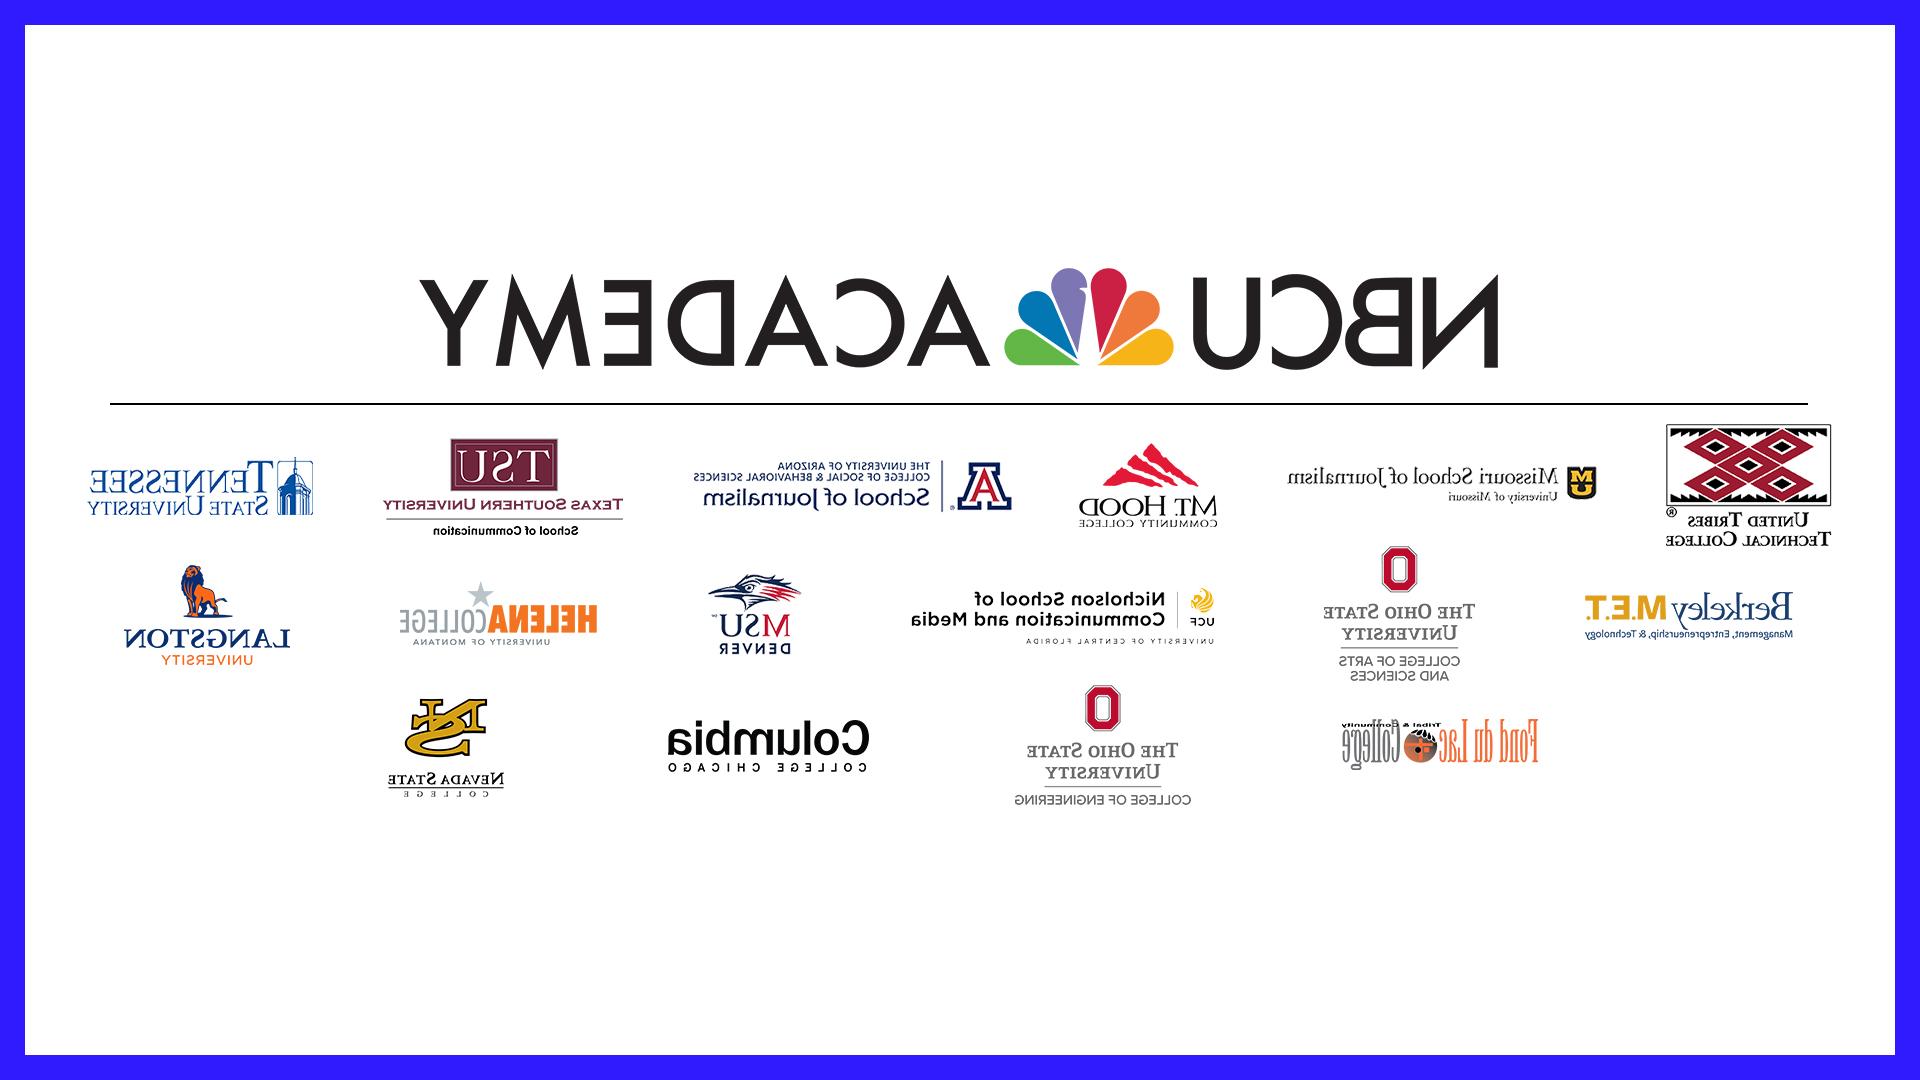 Logos for academic institutions who partner with NBCUniversal Academy